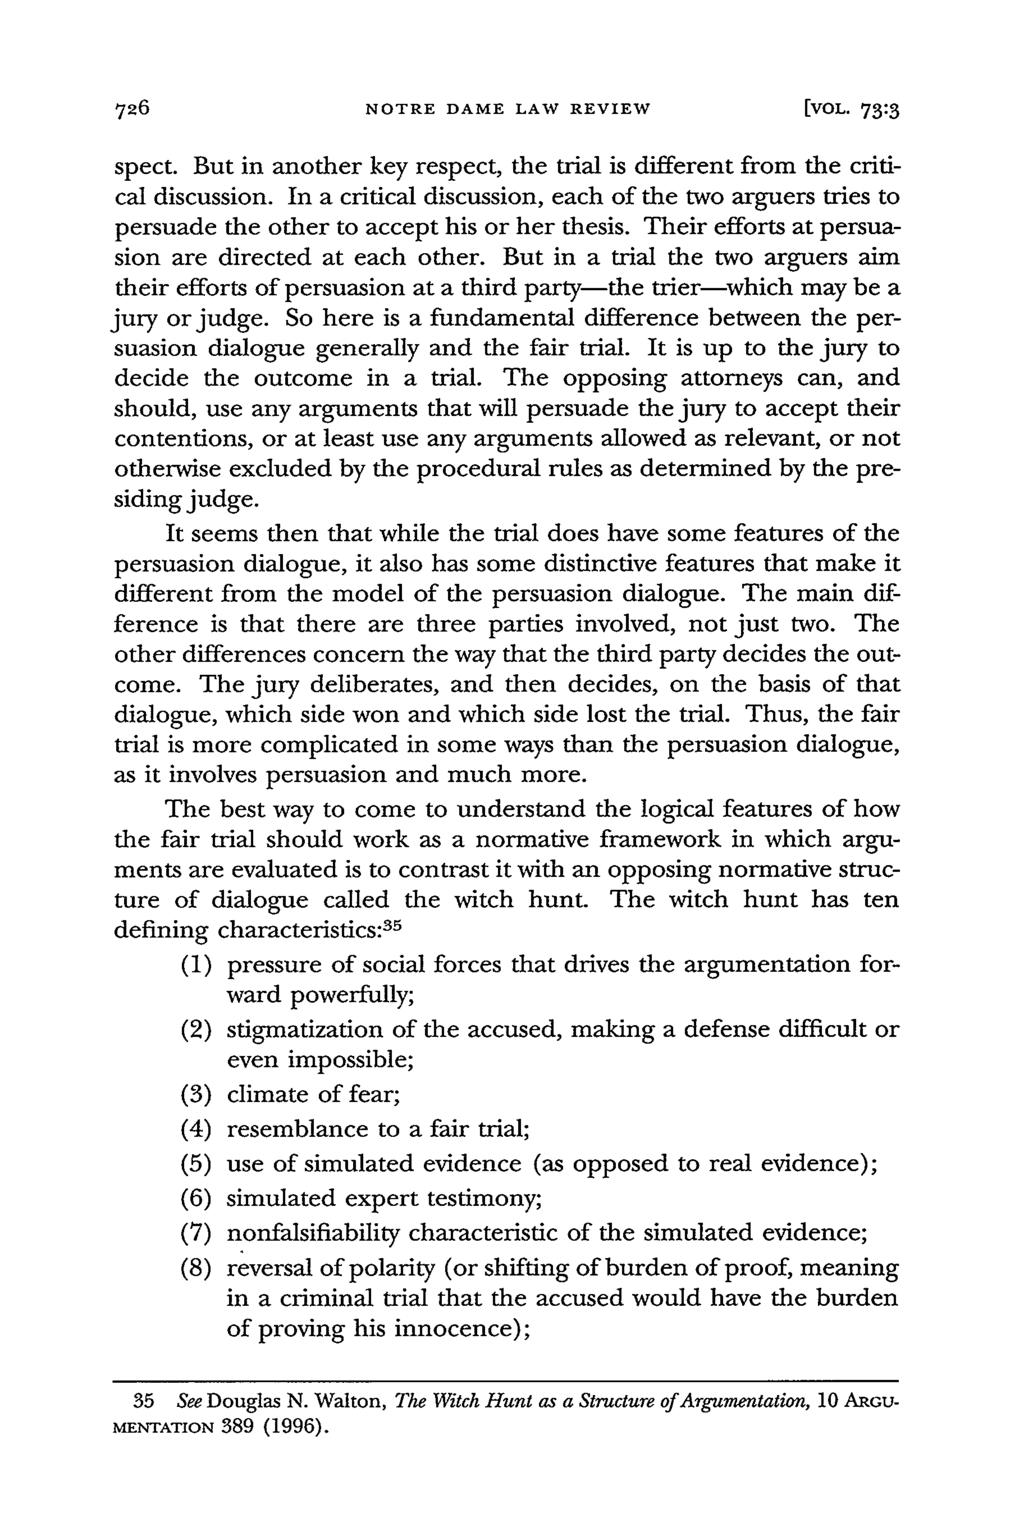 NOTRE DAME LAW REVIEW [VOL- 73:3 spect. But in another key respect, the trial is different from the critical discussion.